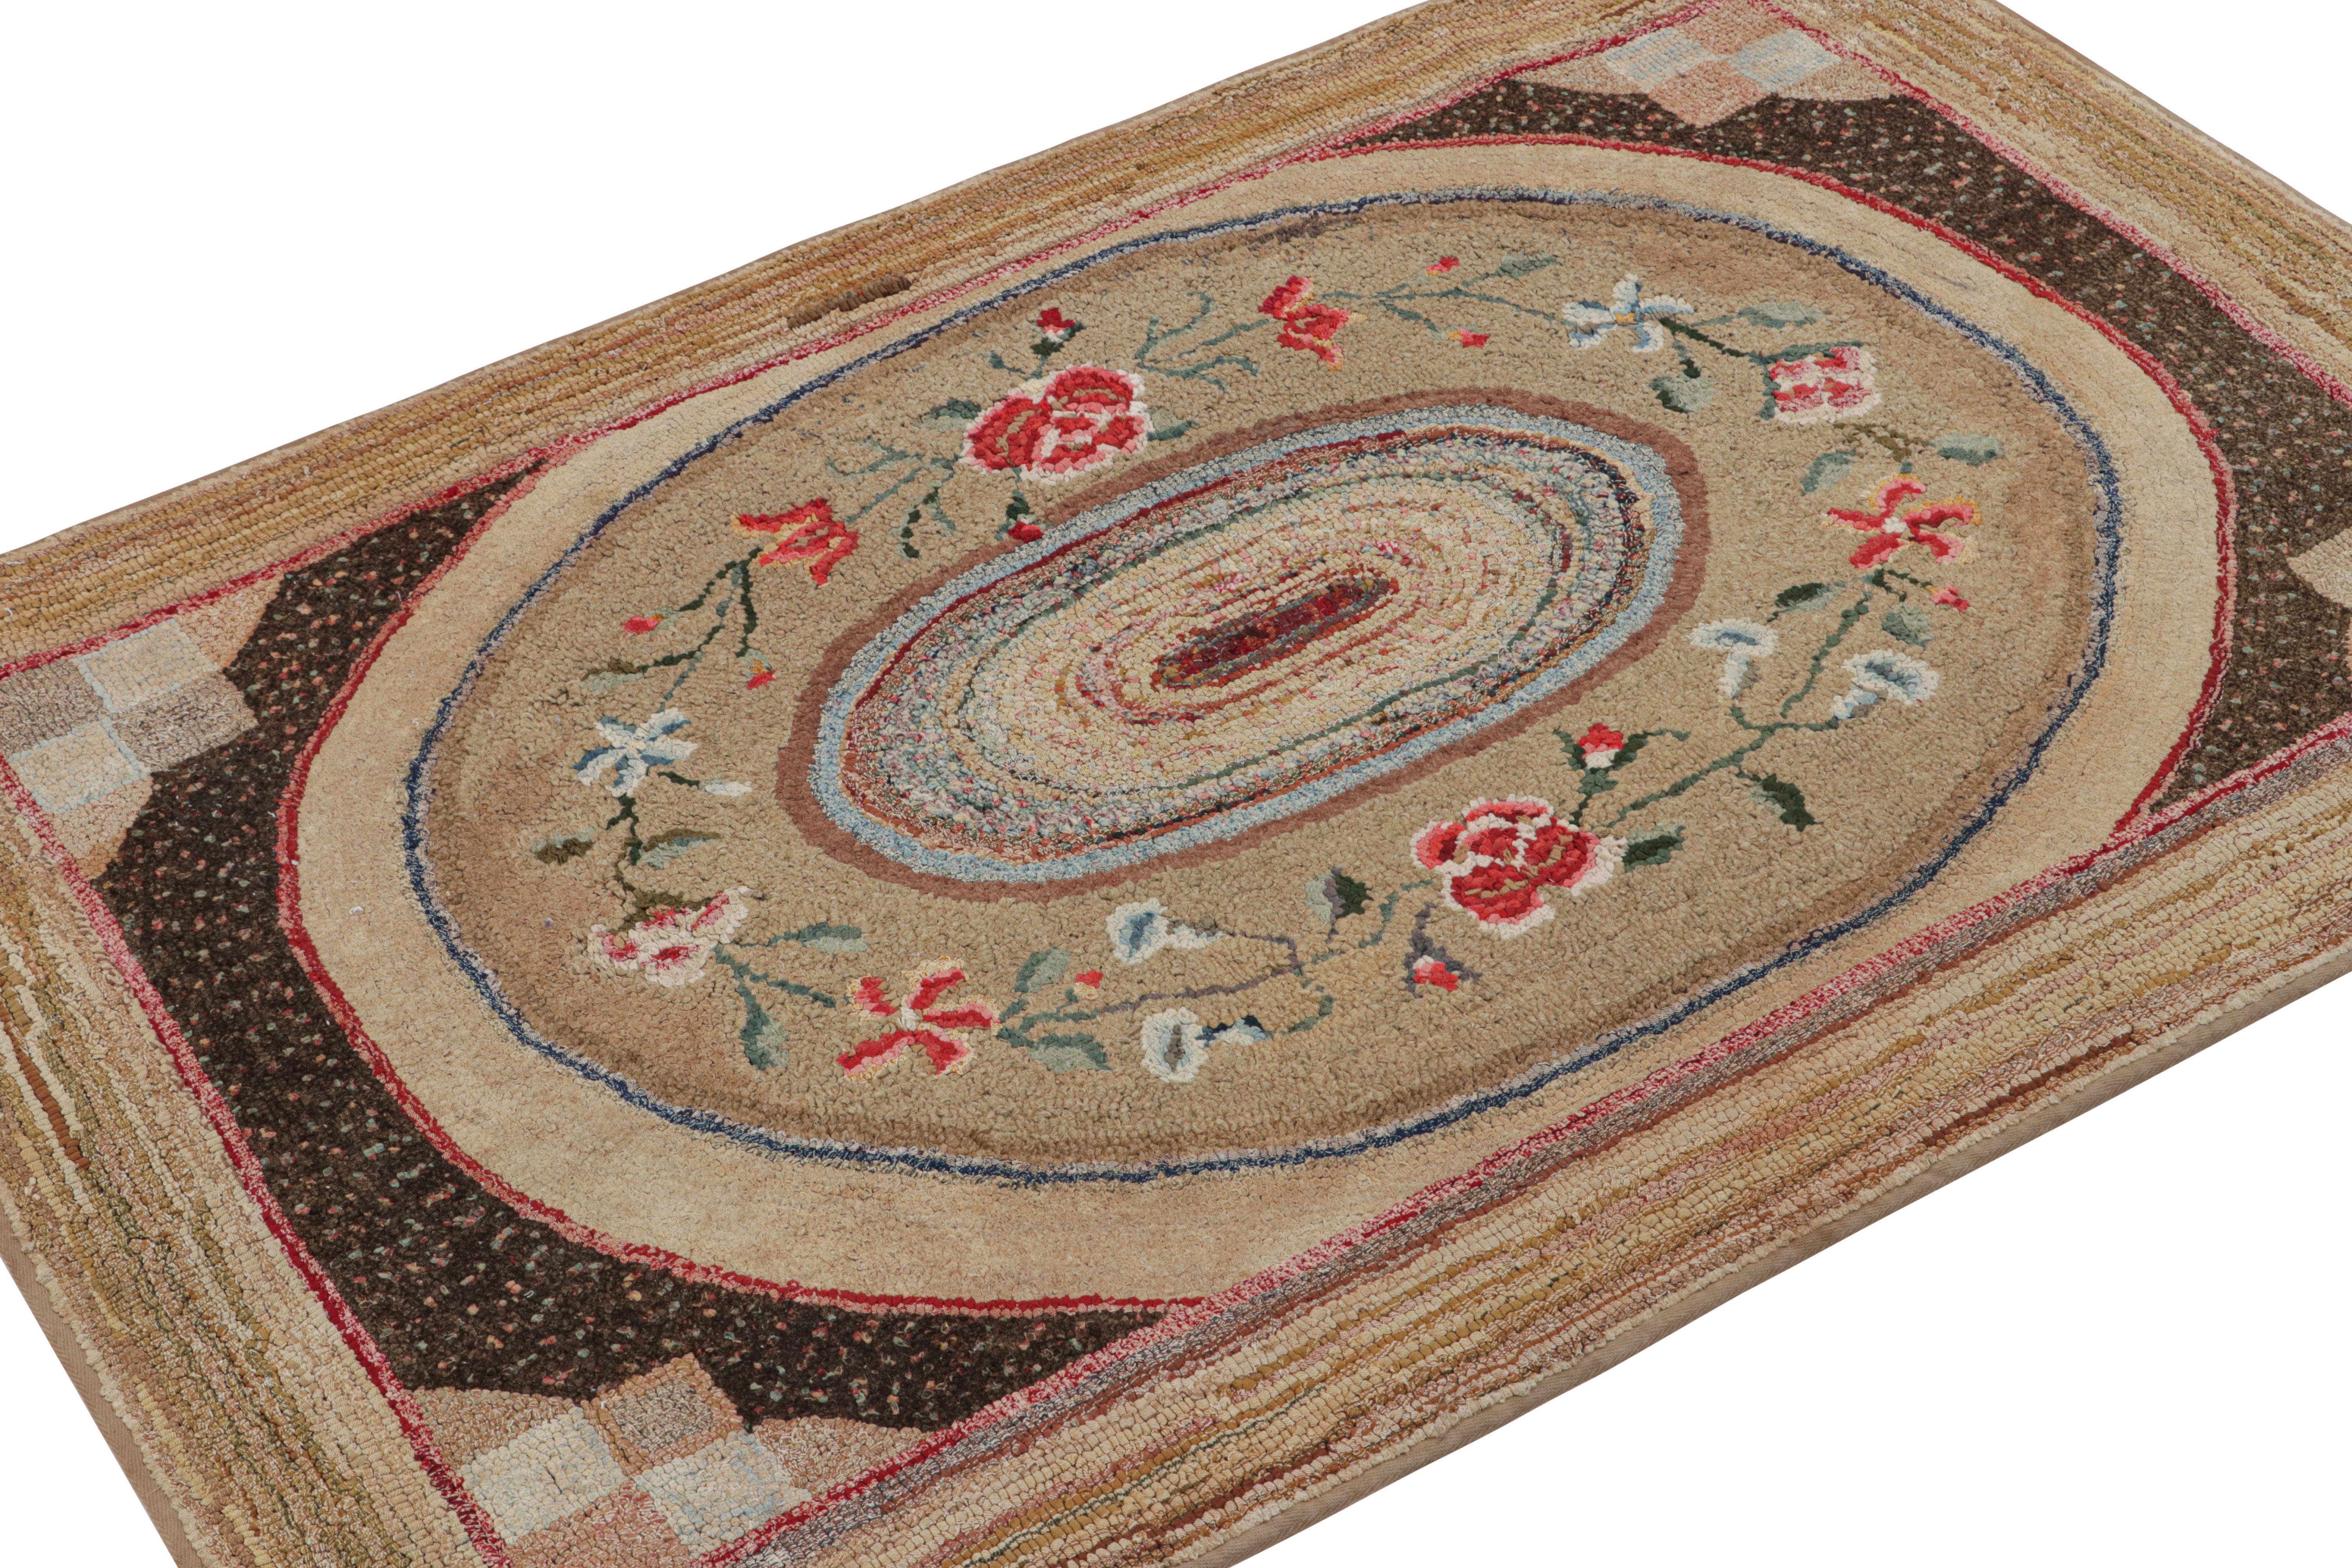 A rare 3x5 antique hooked rug in of United States provenance, handmade in wool and fabric circa 1920-1930 with floral patterns. 

On the Design: 

This collectible piece enjoys a subtle resemblance to Neoclassical rugs like Aubussons and